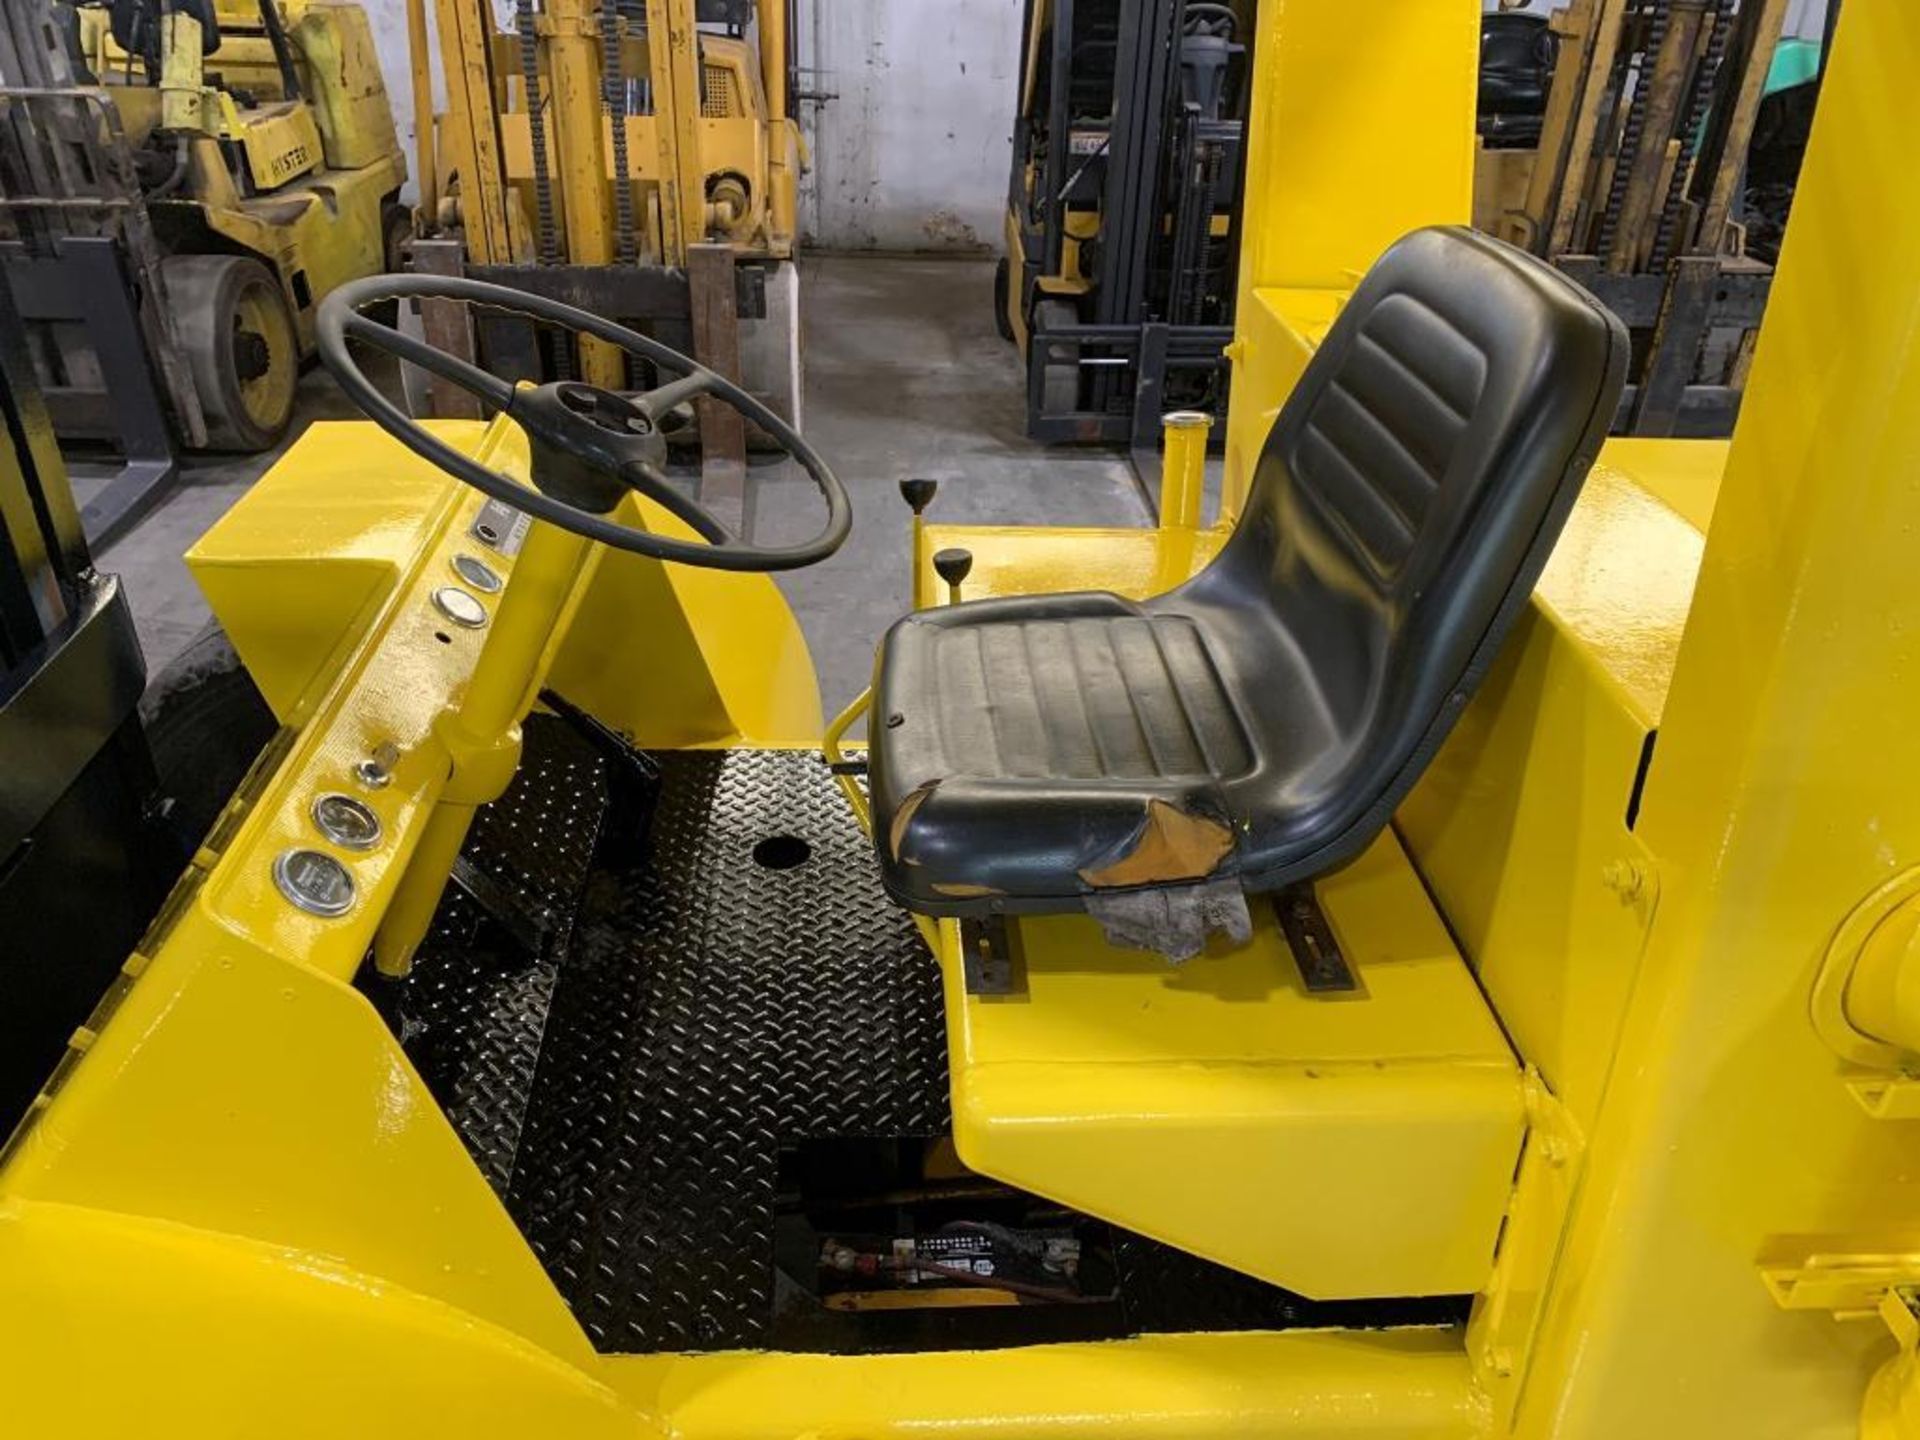 Hyster 22,500 lb. capacity forklift, model h225e, s/n n/a, gasoline, dual drive pneumatic tires, 2-s - Image 7 of 7